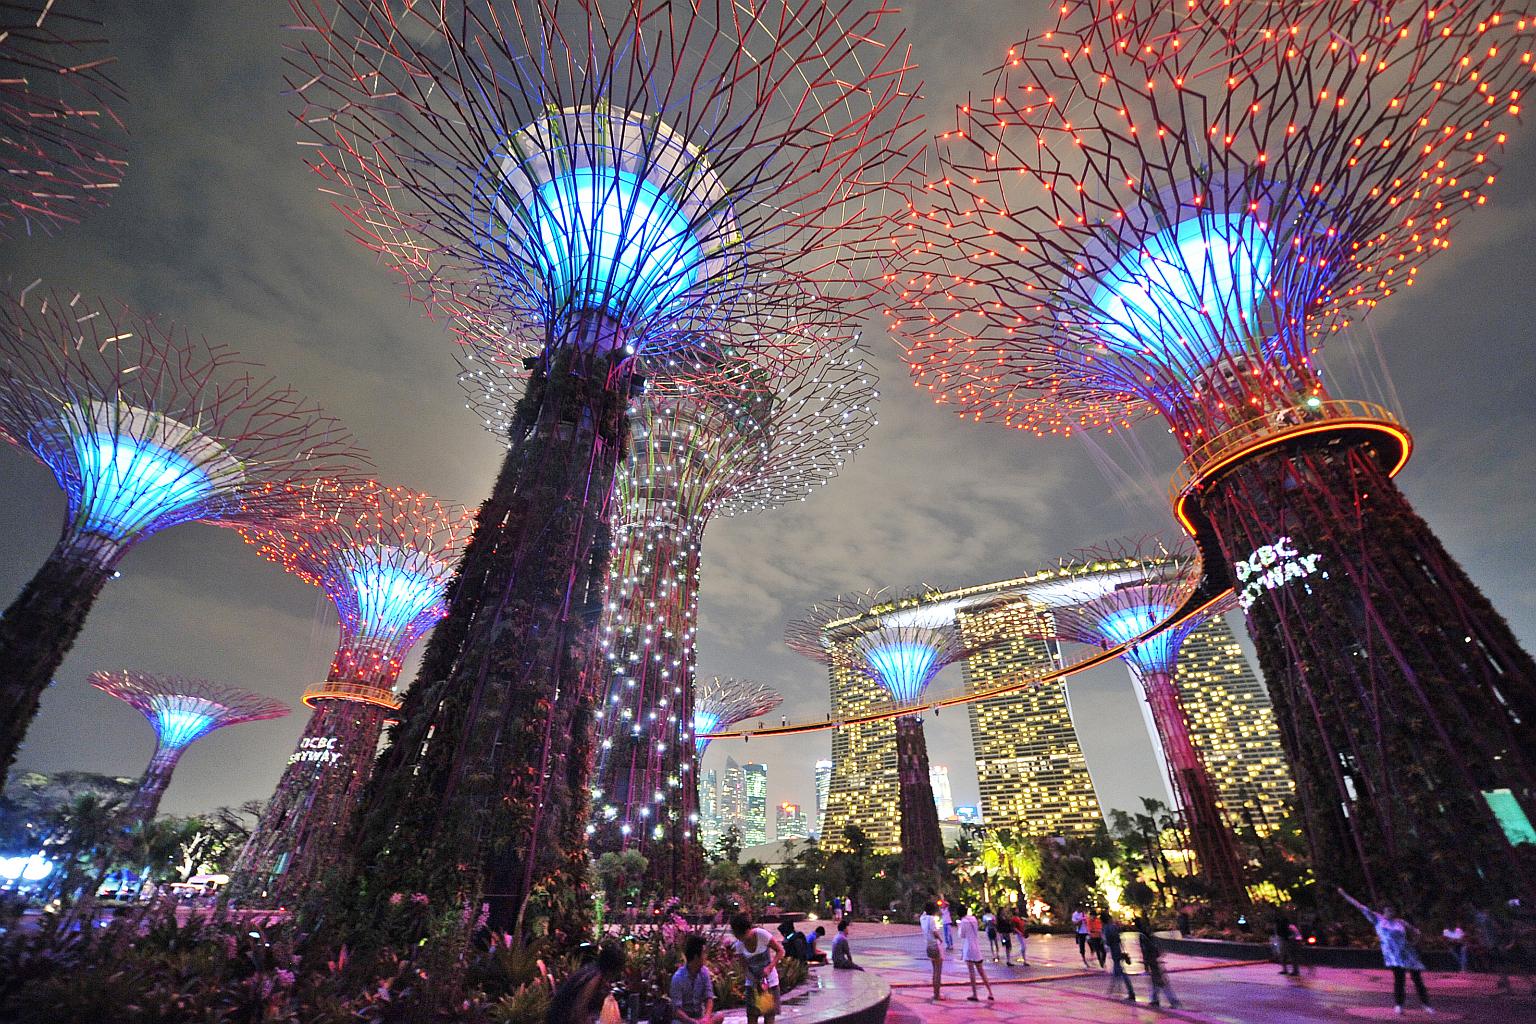 Singapore is the best place to live in the world, according to expats